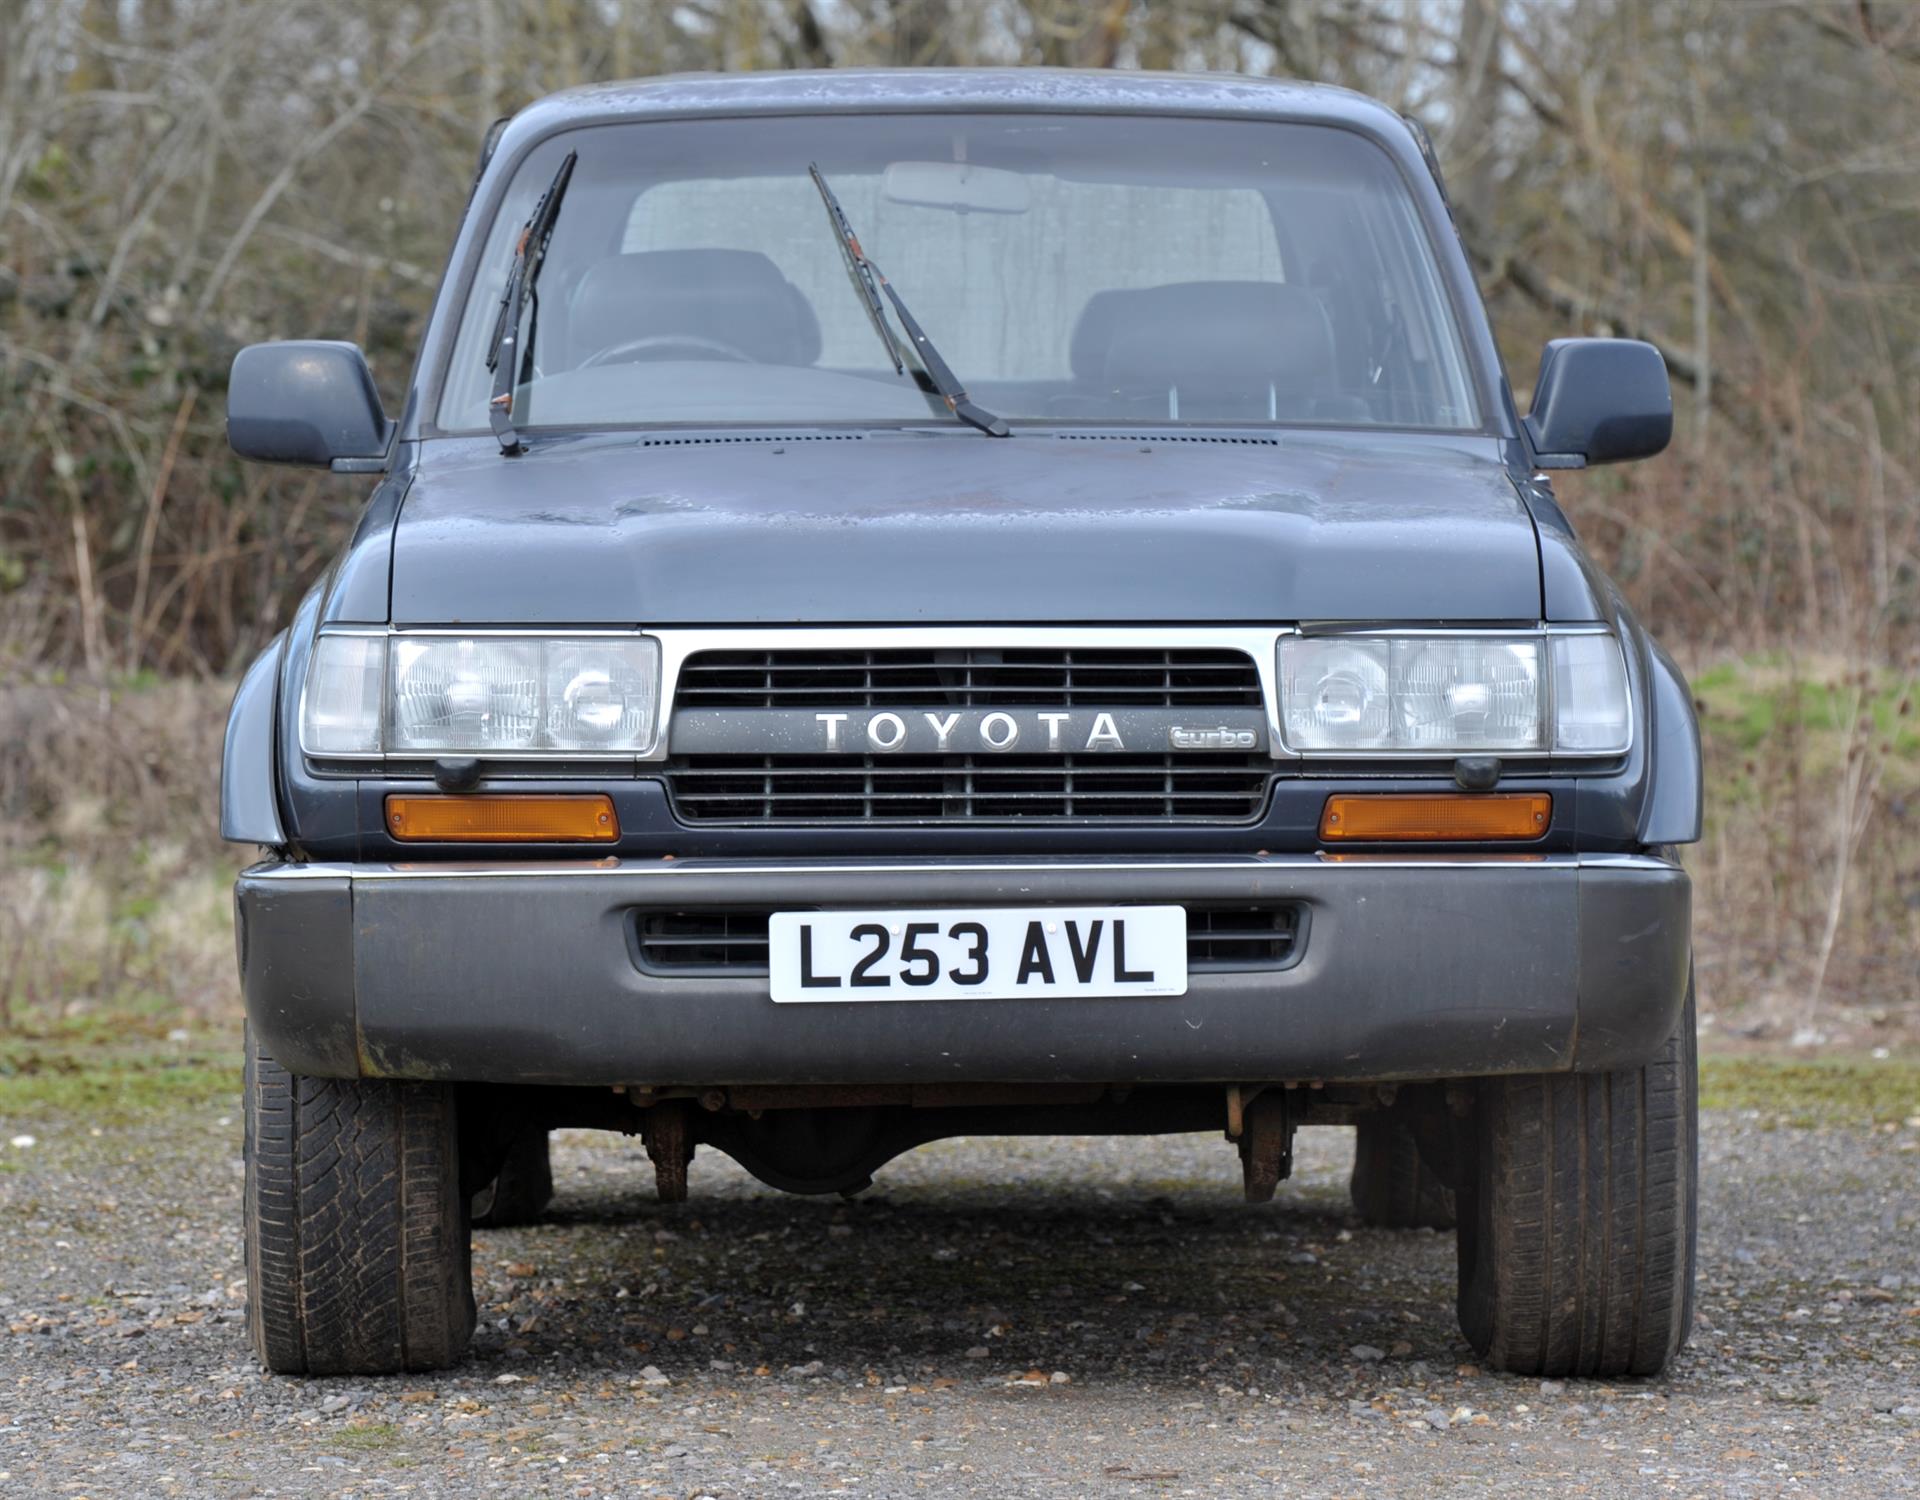 1993 Toyota Land Cruiser VX 80 series 4.2 Diesel Automatic. Registration number: L253 ABL. - Image 2 of 14